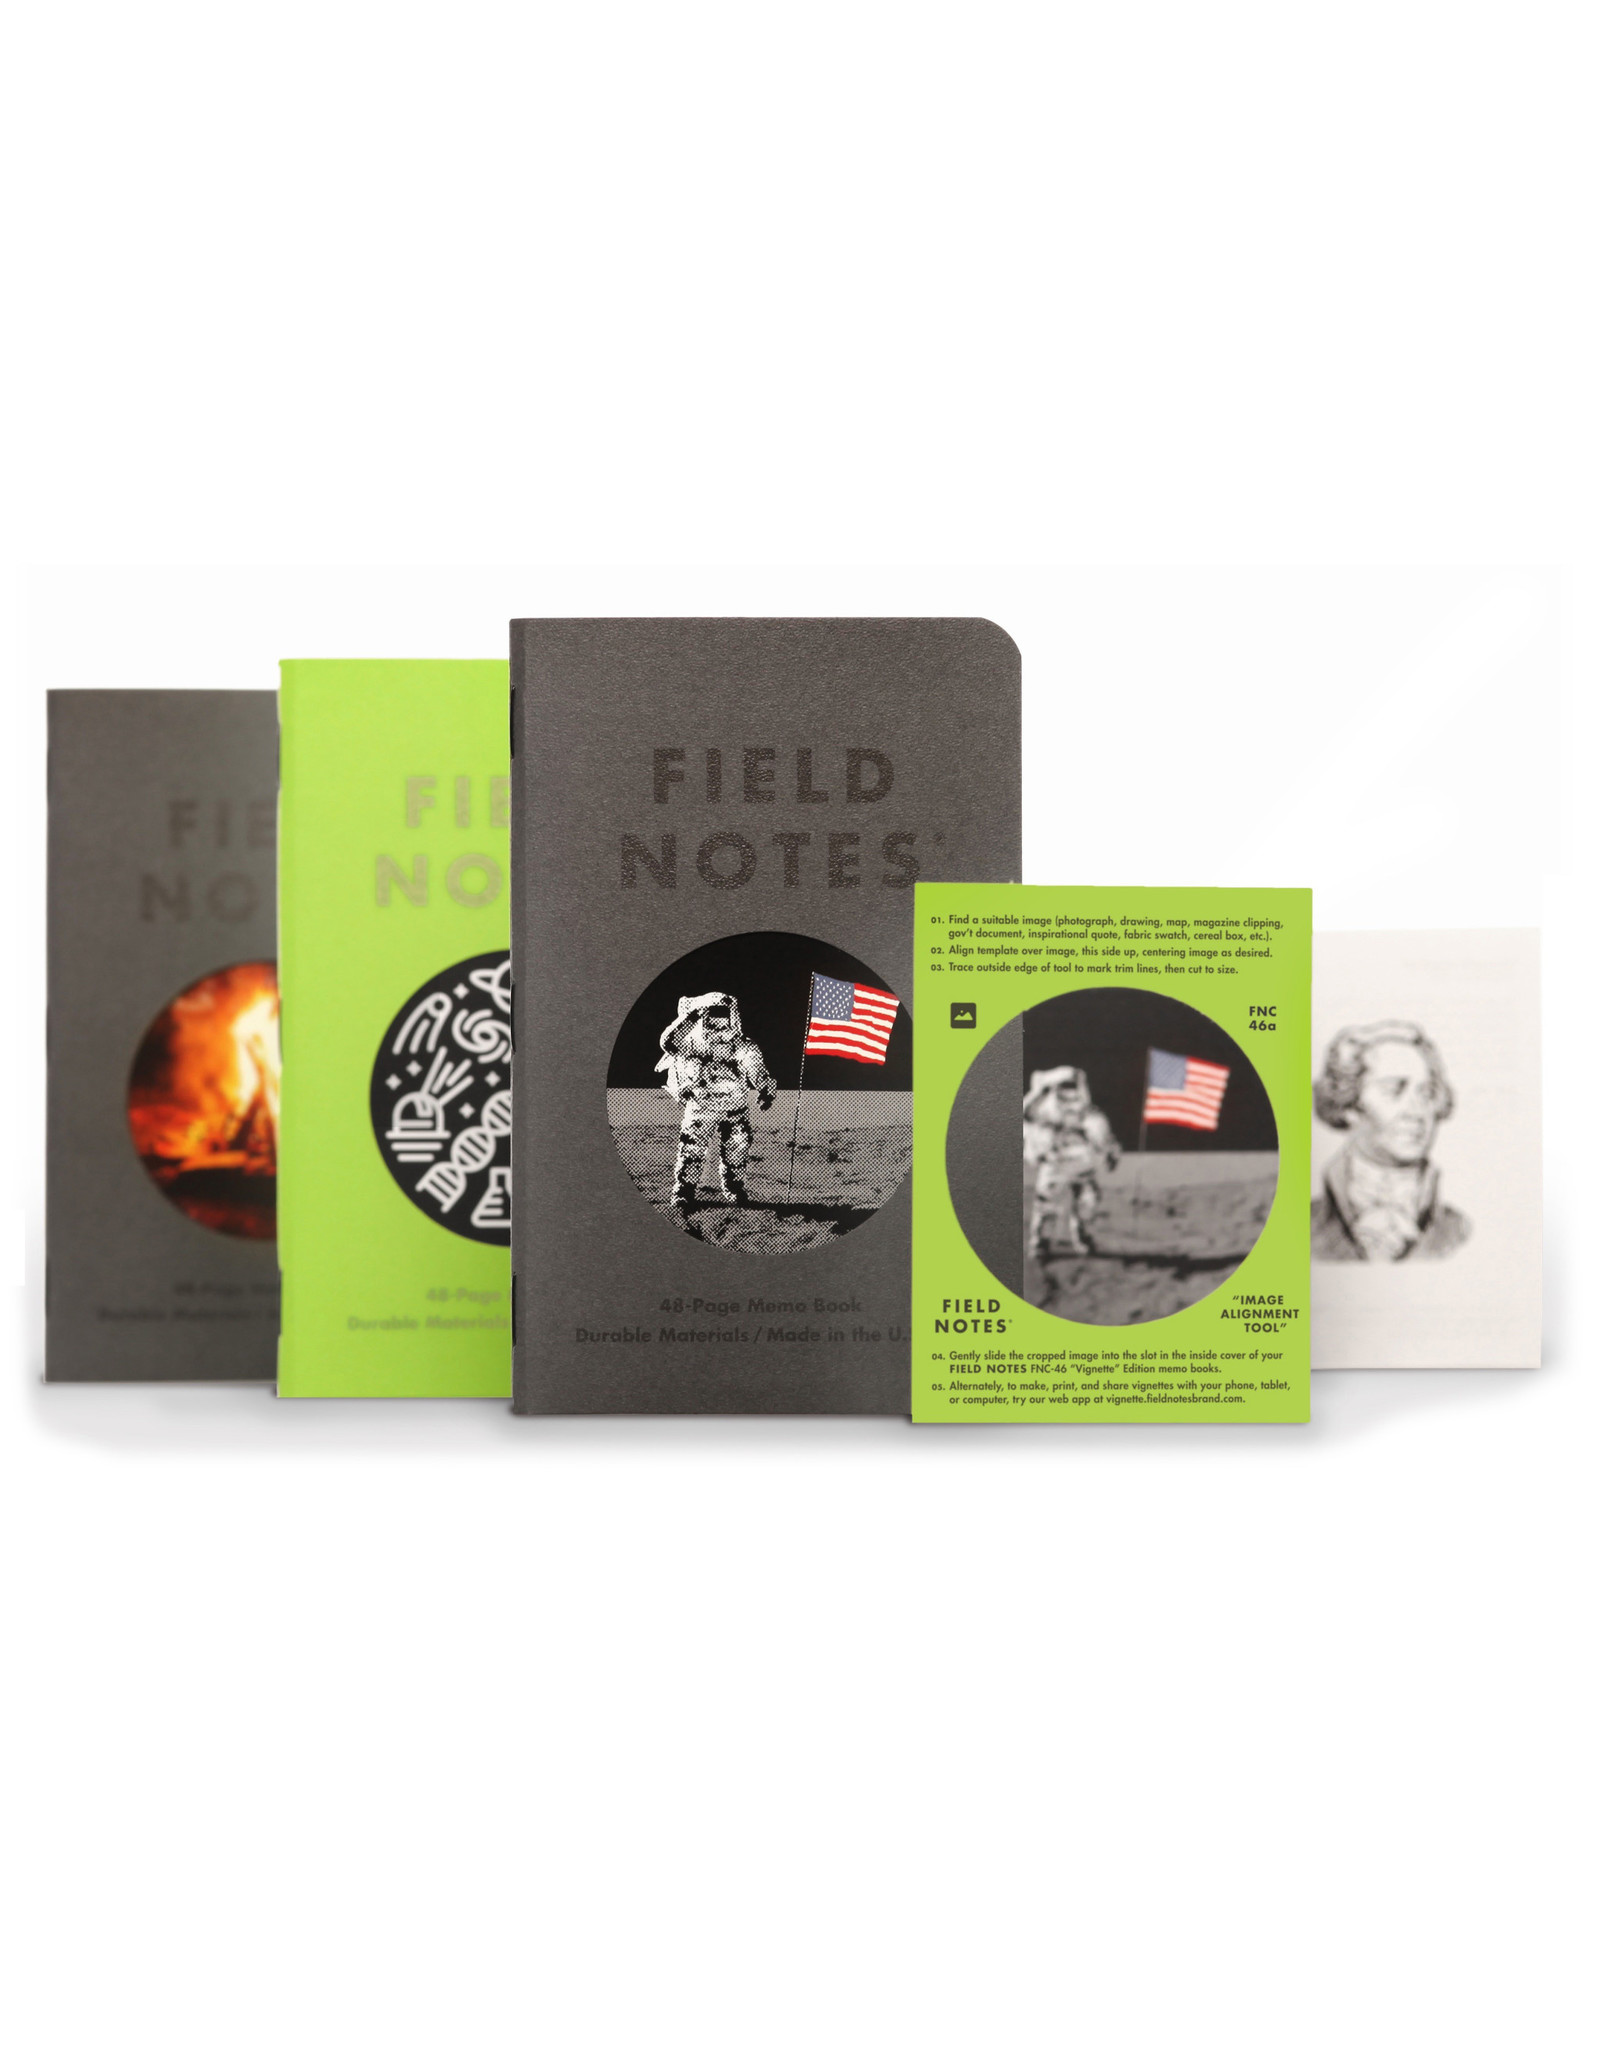 Field Notes Brand Vignette Memo Book 3-Pack Limited Edition